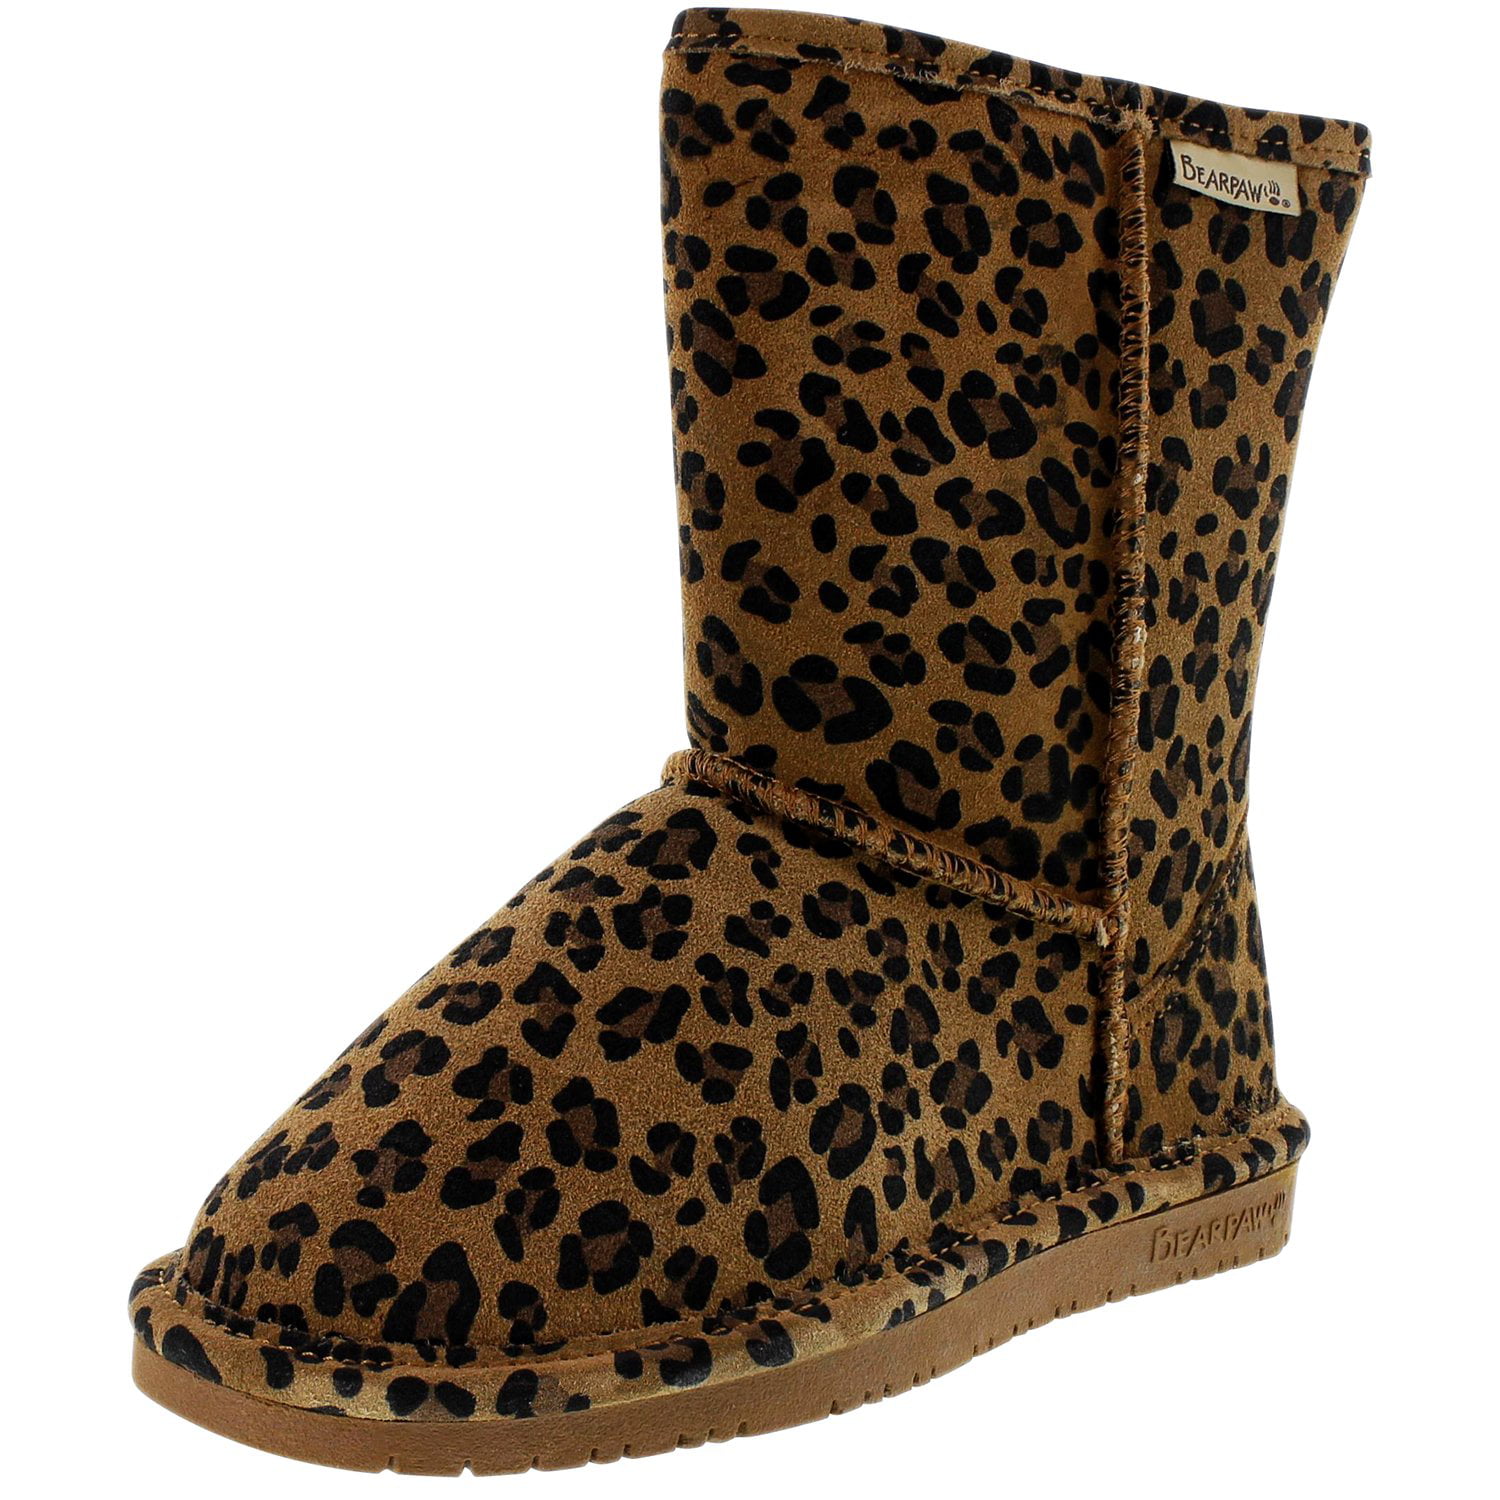 Bearpaw Women s Emma Short Hickory Leopard Ankle-High Suede Boot - 6M